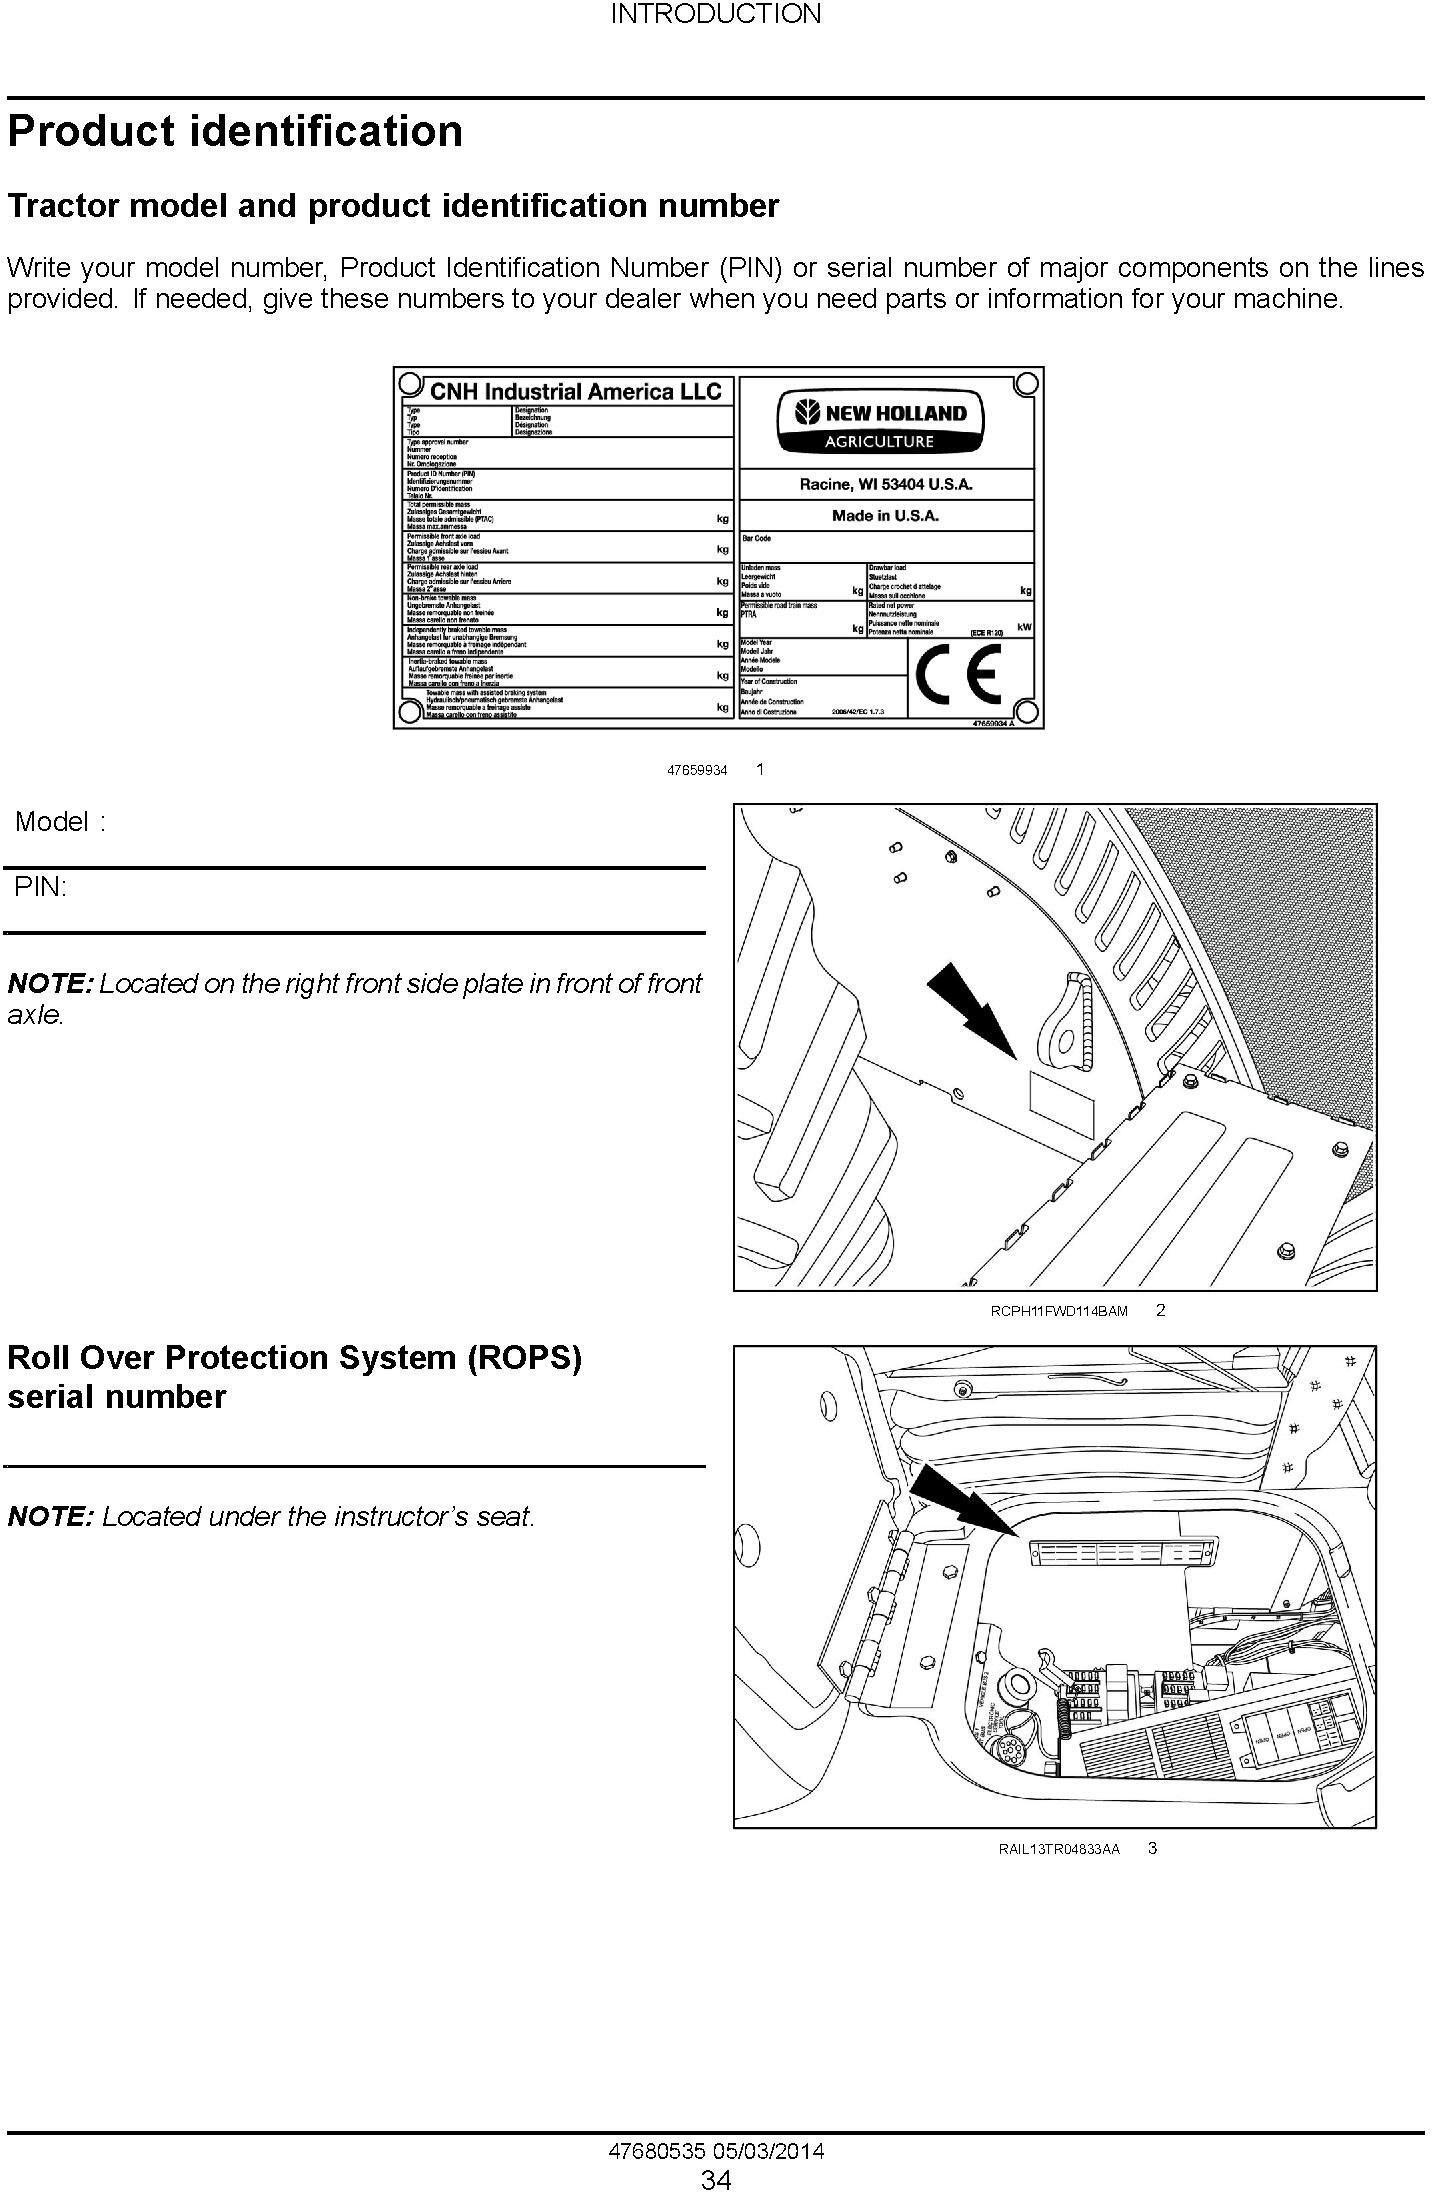 New Holland T9.435, T9.480, T9.530, T9.565, T9.600, T9.645, T9.700 European Tractor Service Manual - 1